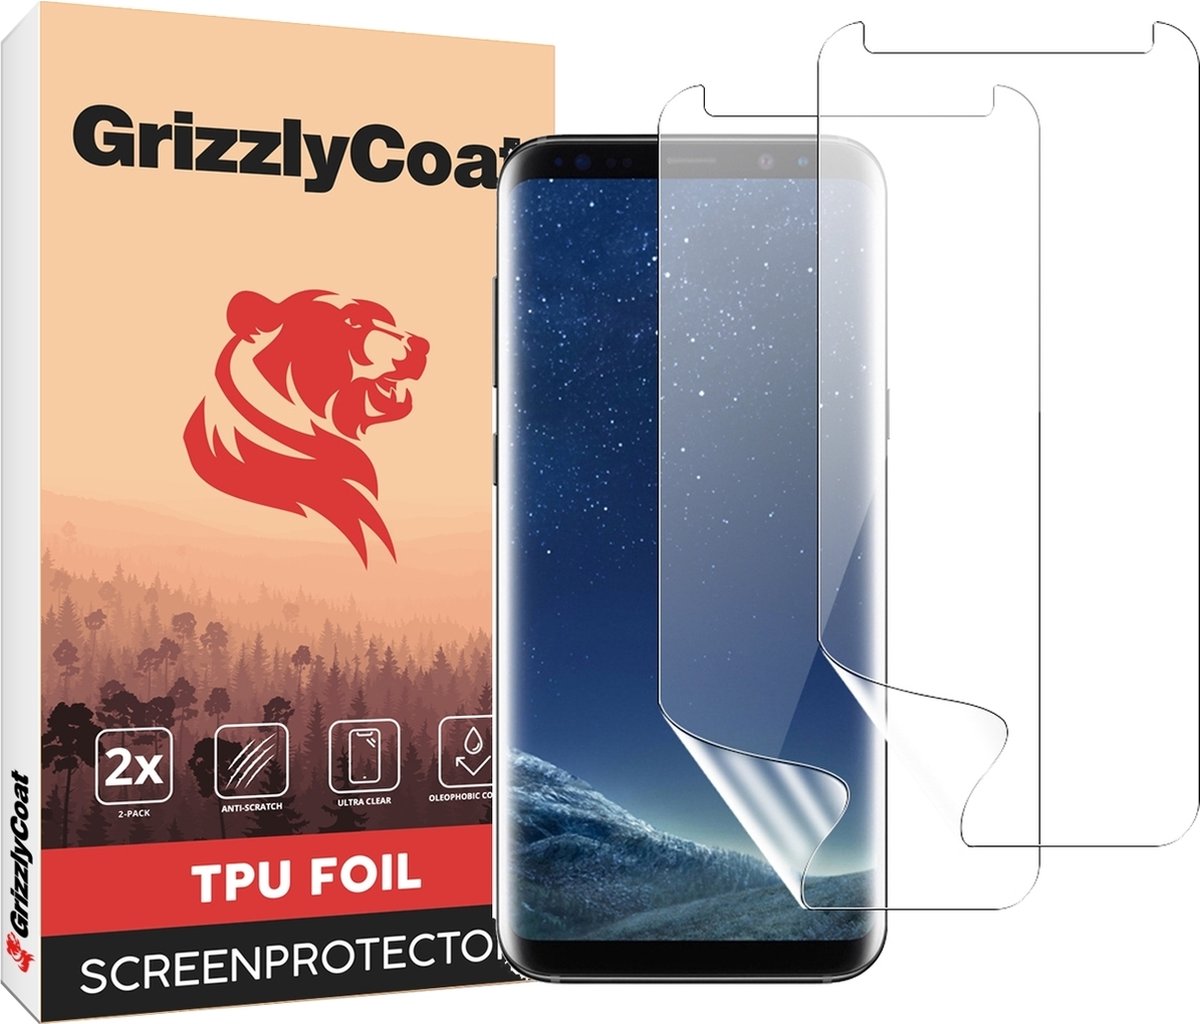 GrizzlyCoat - Screenprotector geschikt voor Samsung Galaxy S8 Plus Hydrogel TPU | GrizzlyCoat Screenprotector - Case Friendly (2-Pack)